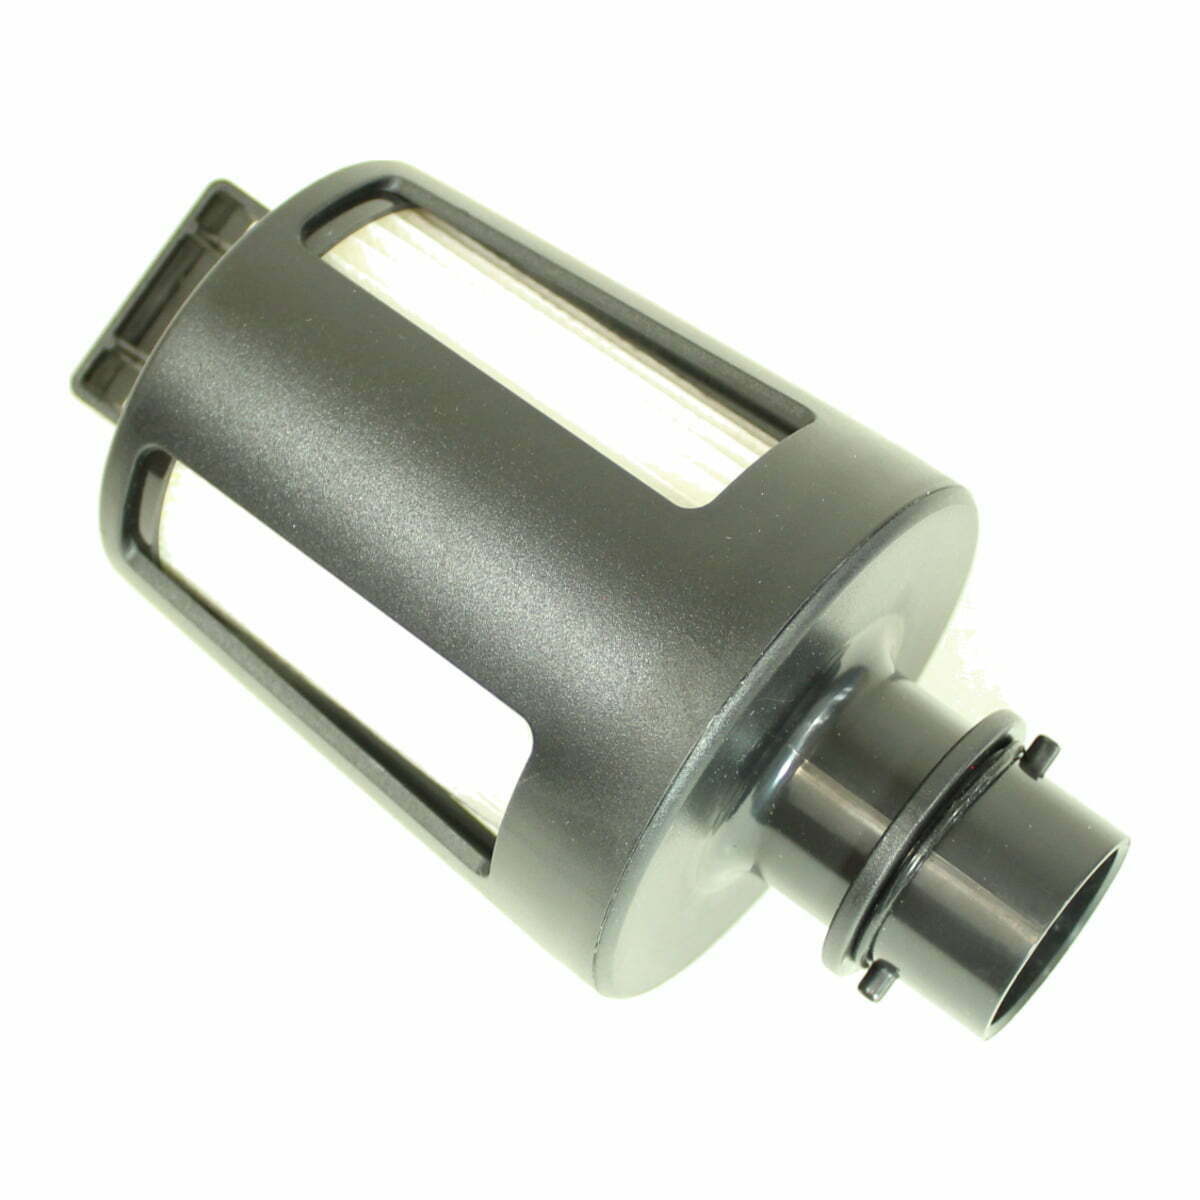 Riccar Diffuser Exhaust Filter For Butler Vacuum Cleaner 